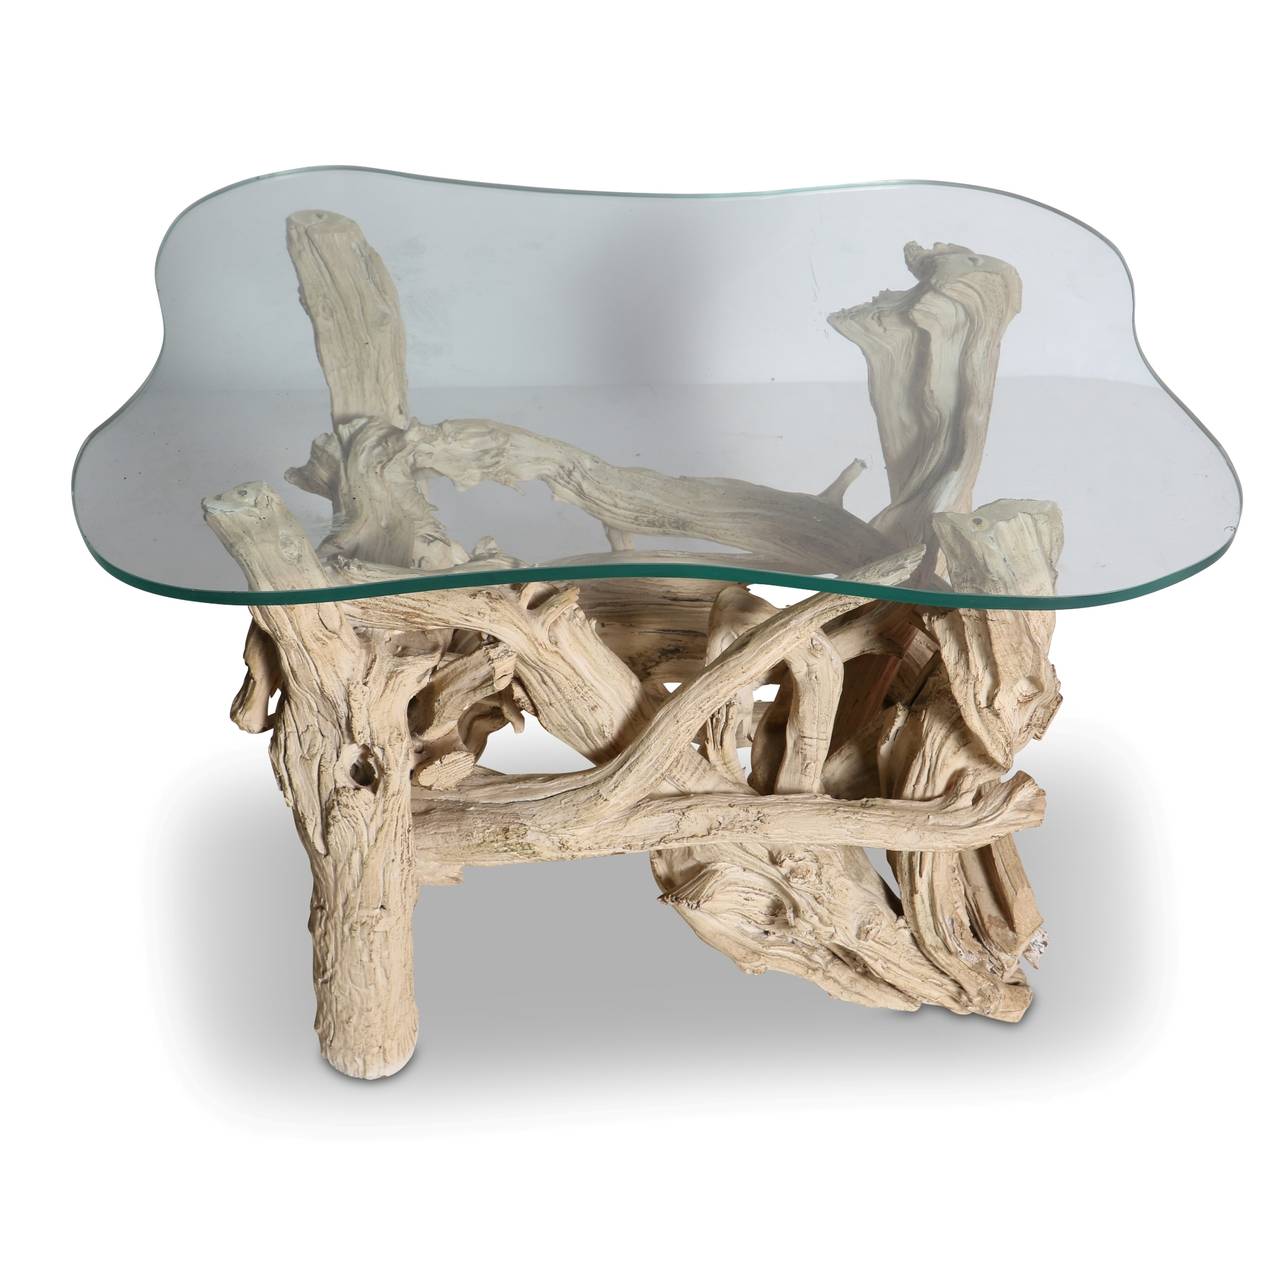 American Mid-Century Gesso Washed Driftwood End Table, circa 1950s